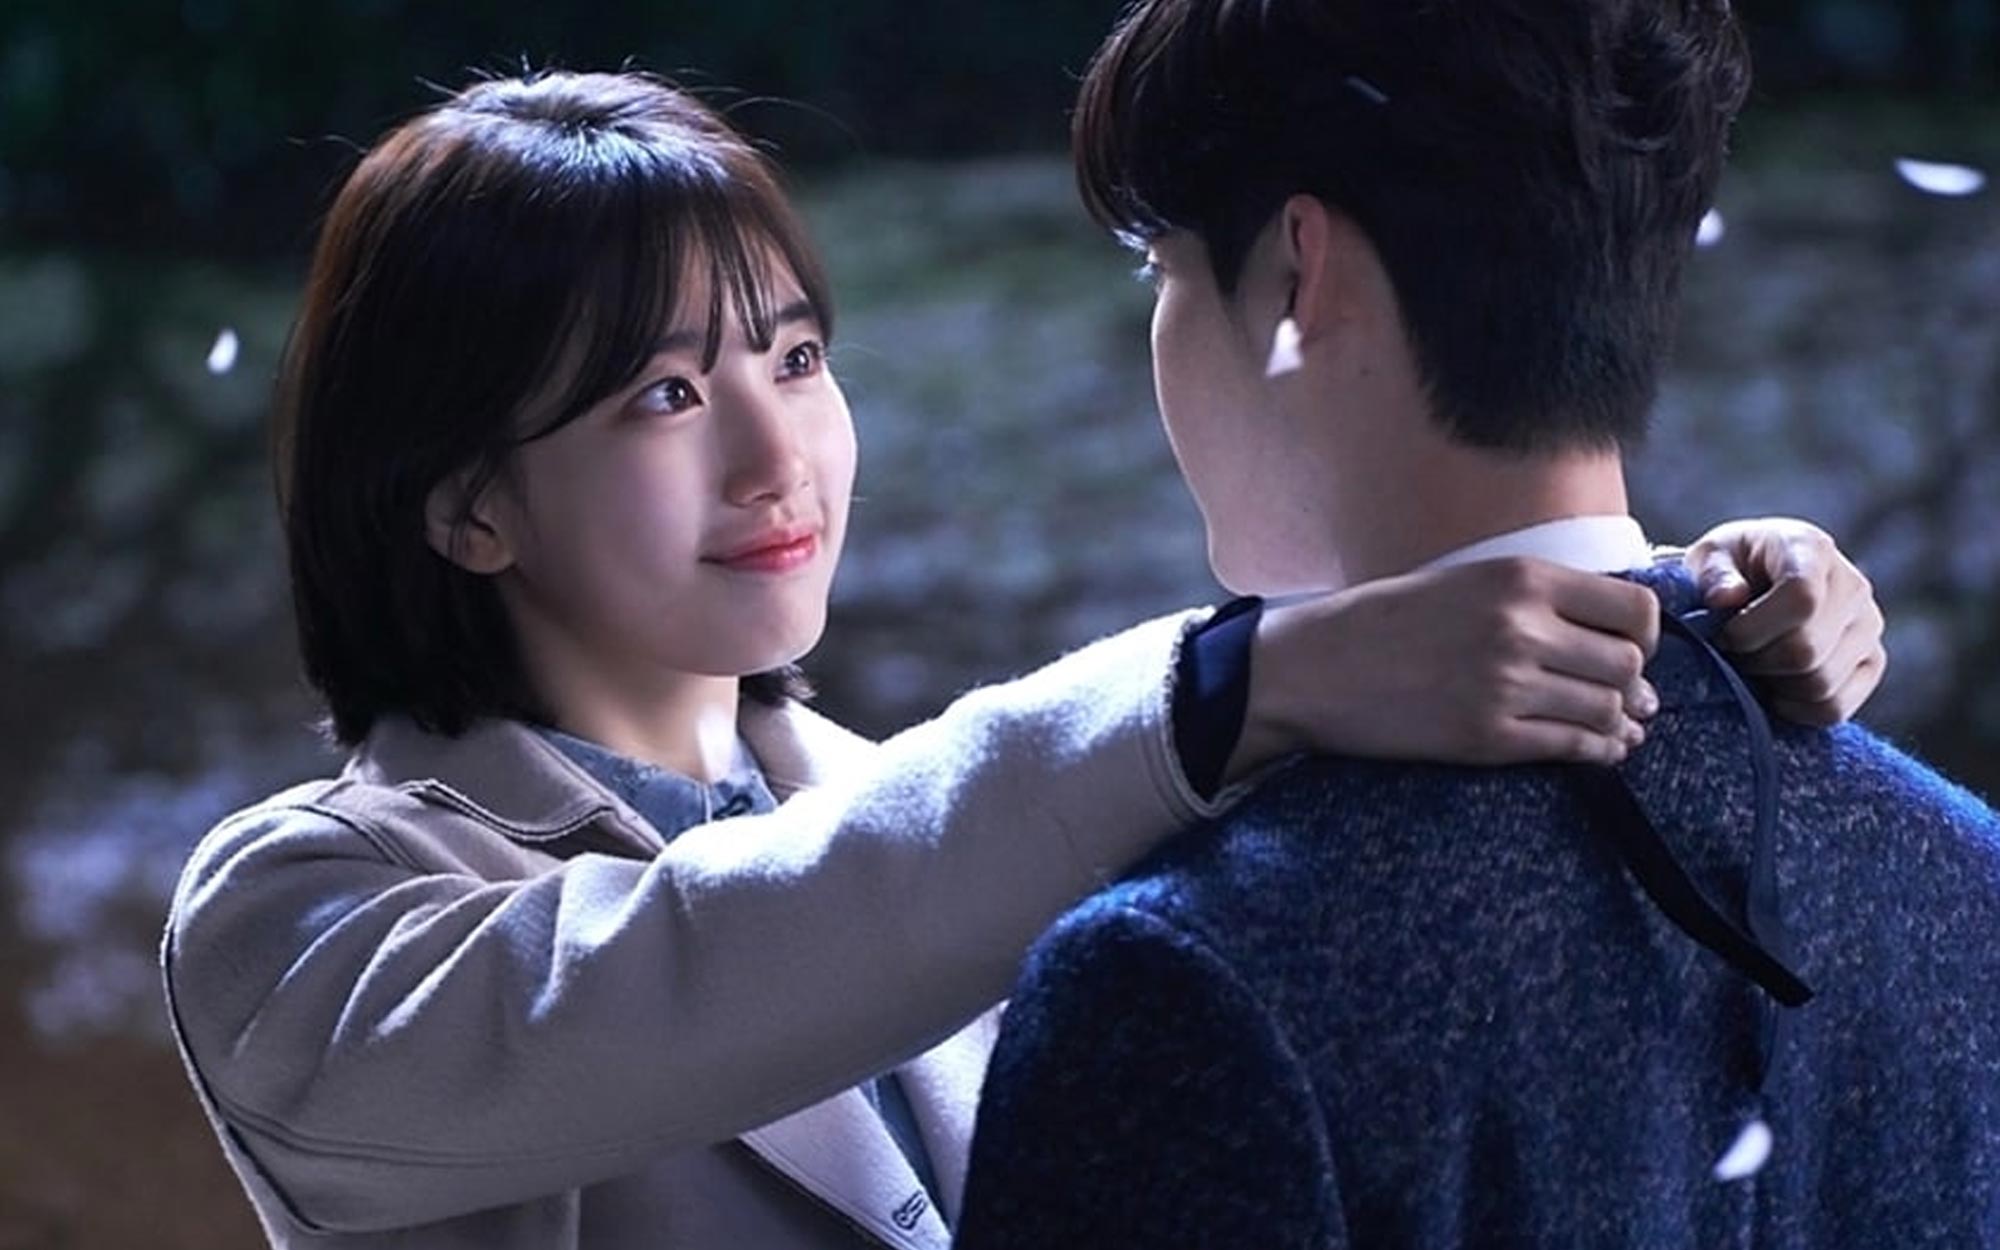 Honest Review Of K-Drama 'While You Were Sleeping'